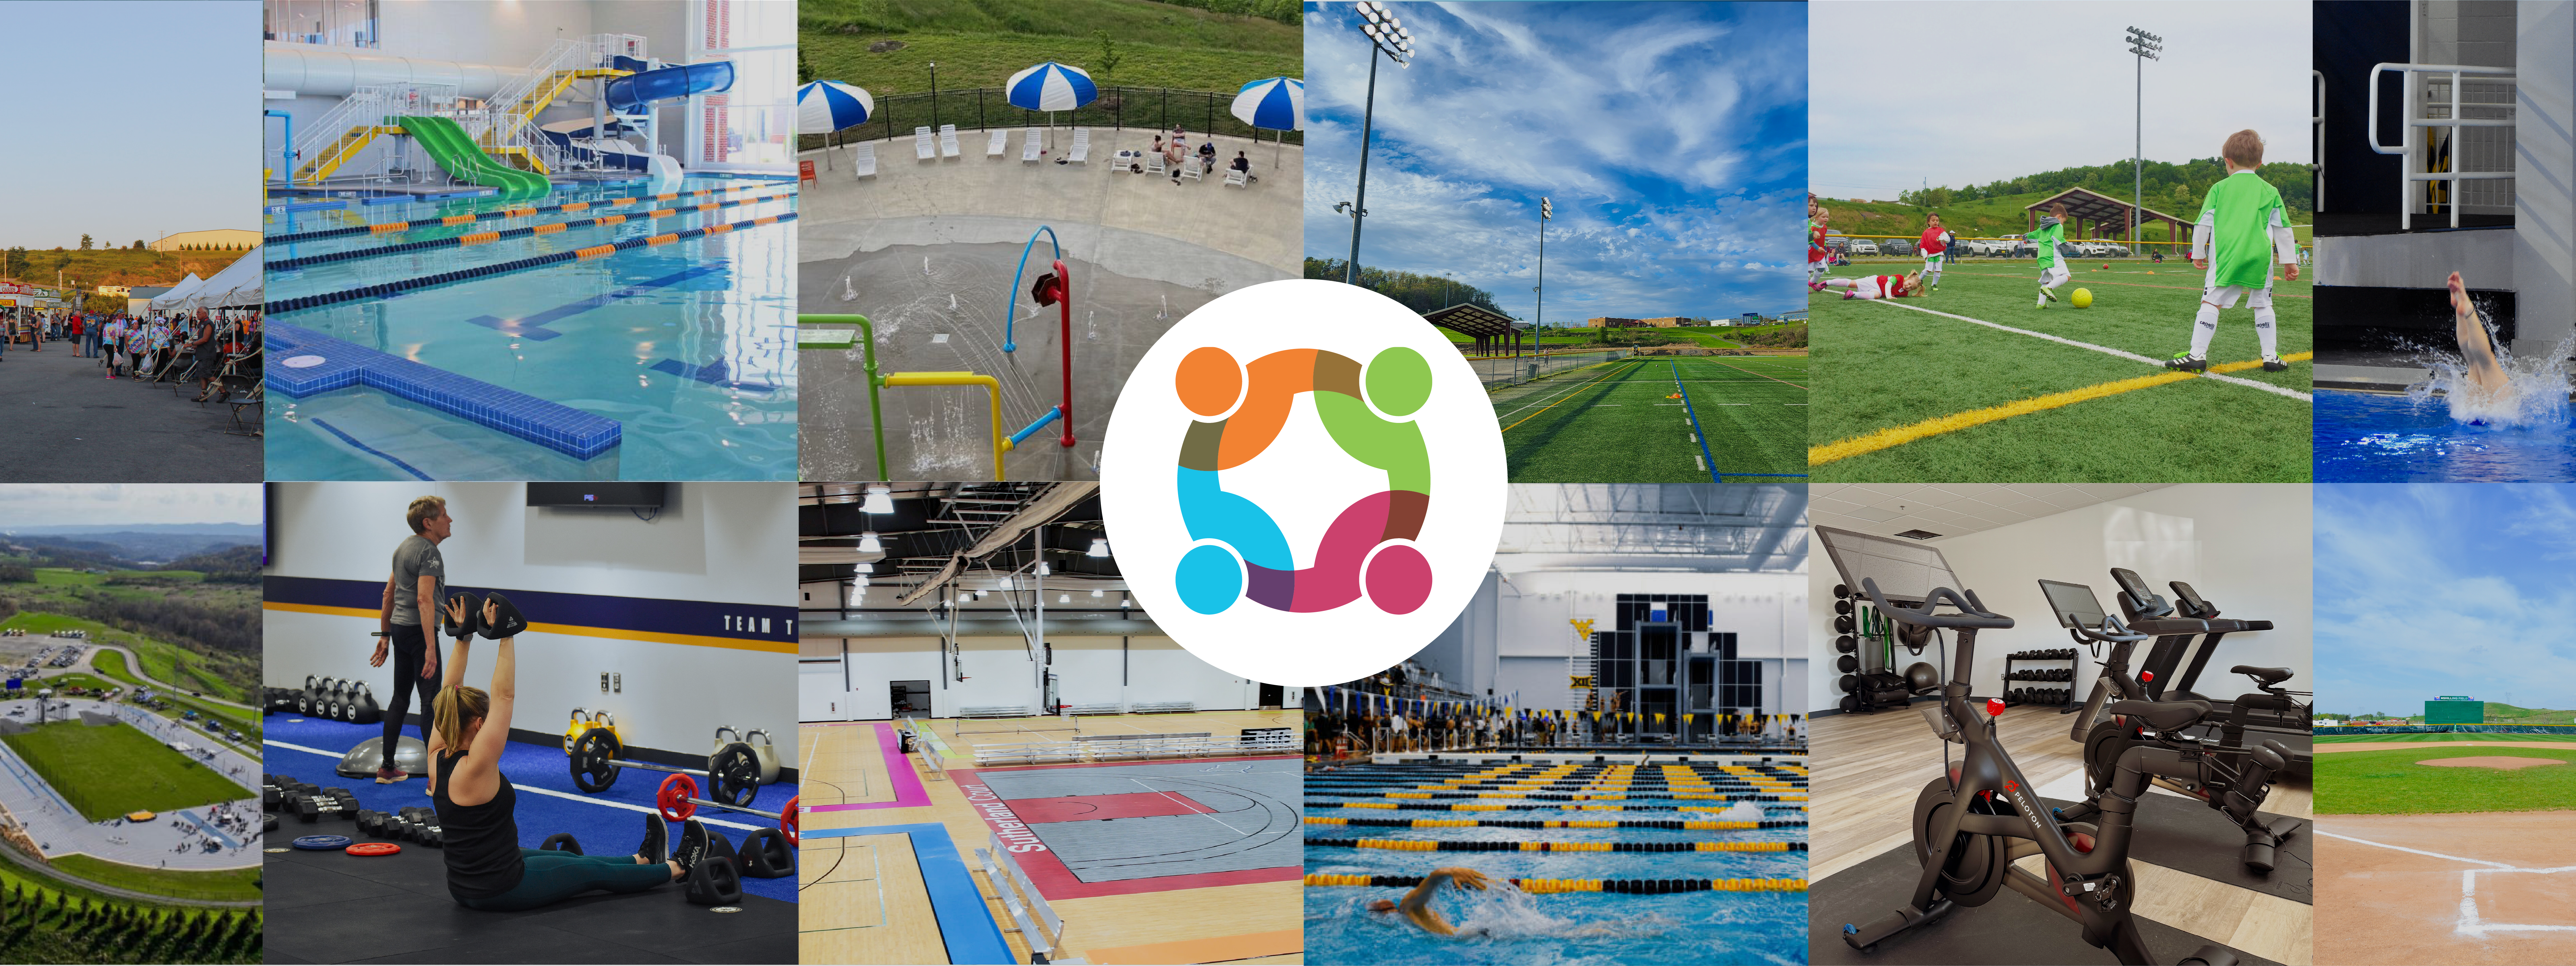 Mylan Park Facilities Pools, Diving Wells, Splash Pad, Basketball Courts, Event Complex, Baseball Field, Multipurpose Fields, Fitness Centers, Competitions, and Parties